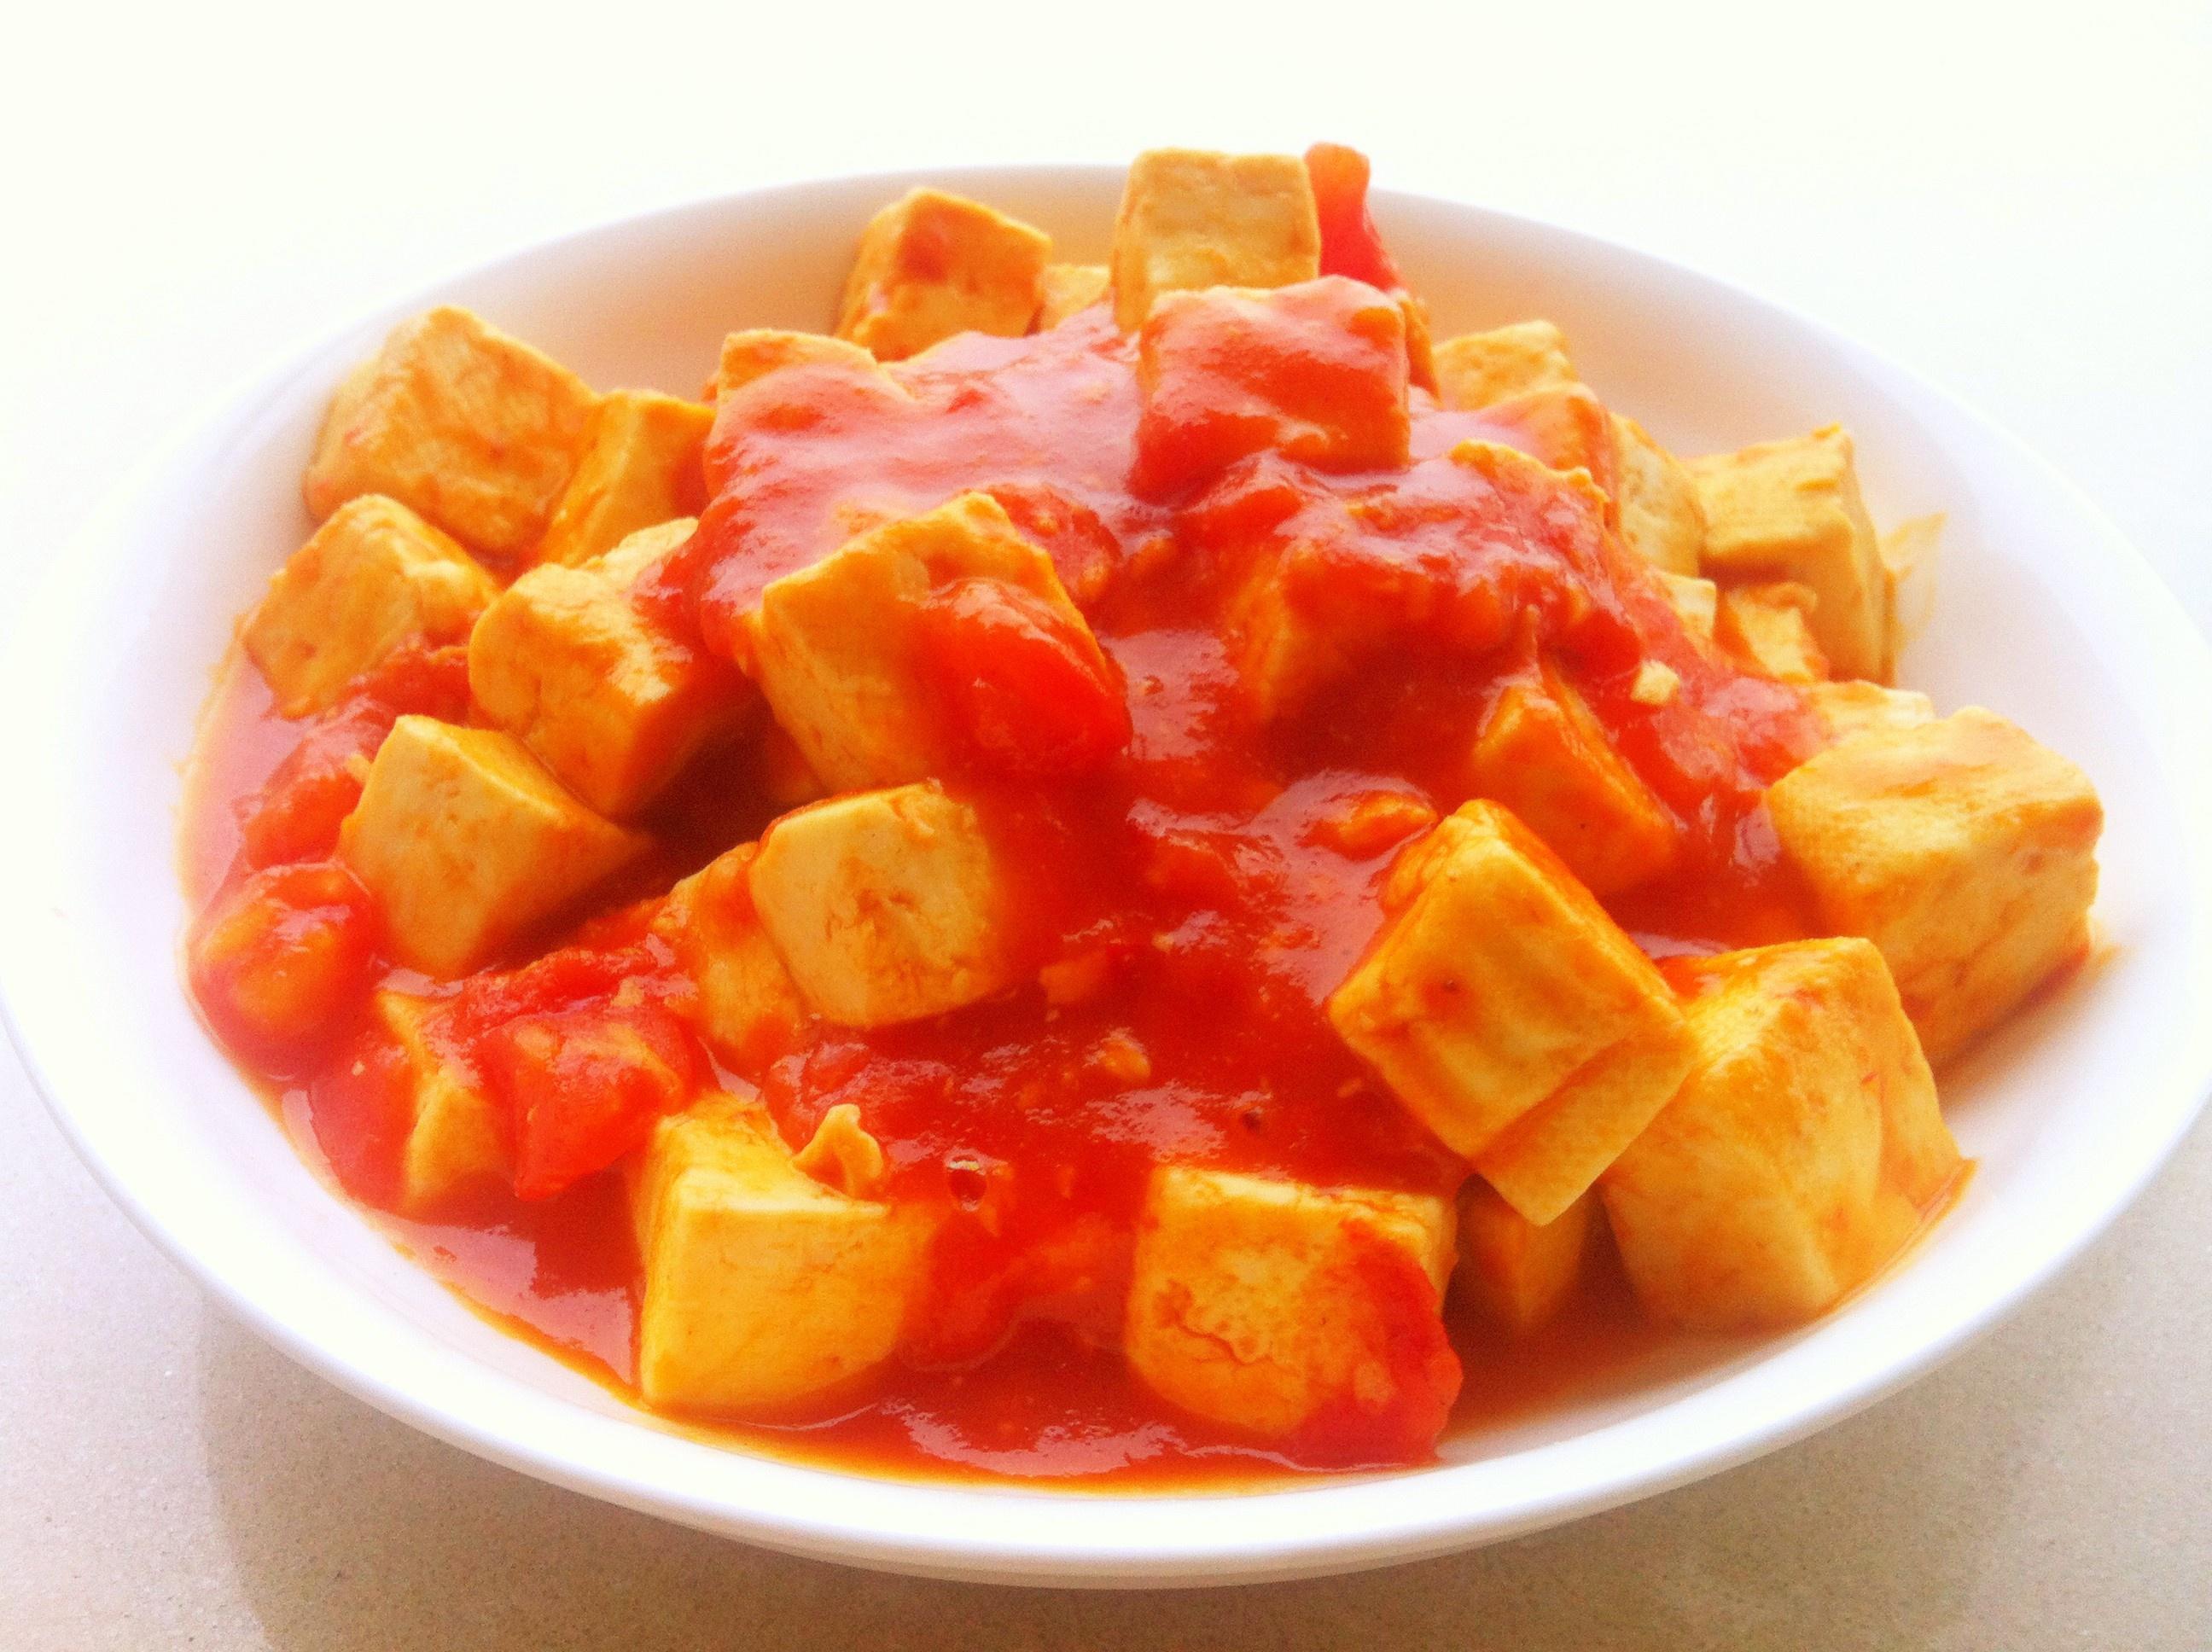 
Tomato stews the practice of bean curd, how is the tomato bean curd that stew done delicious